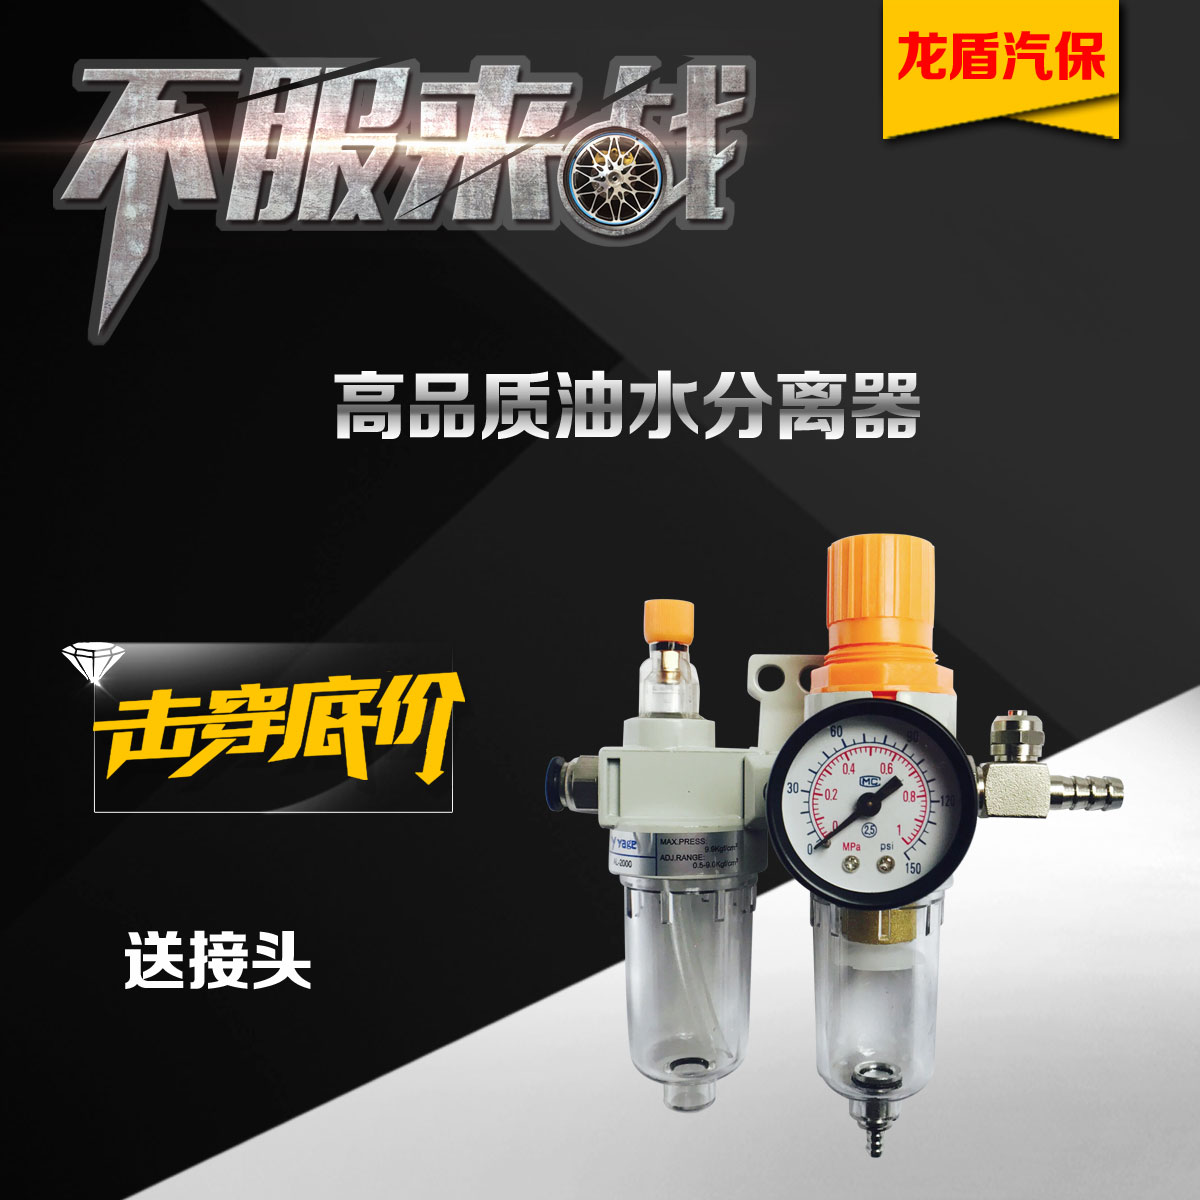 Disassembly and machine parts oil cup oil mist device pressure regulating and pressure reducing valve oil-water separator filter Longshield